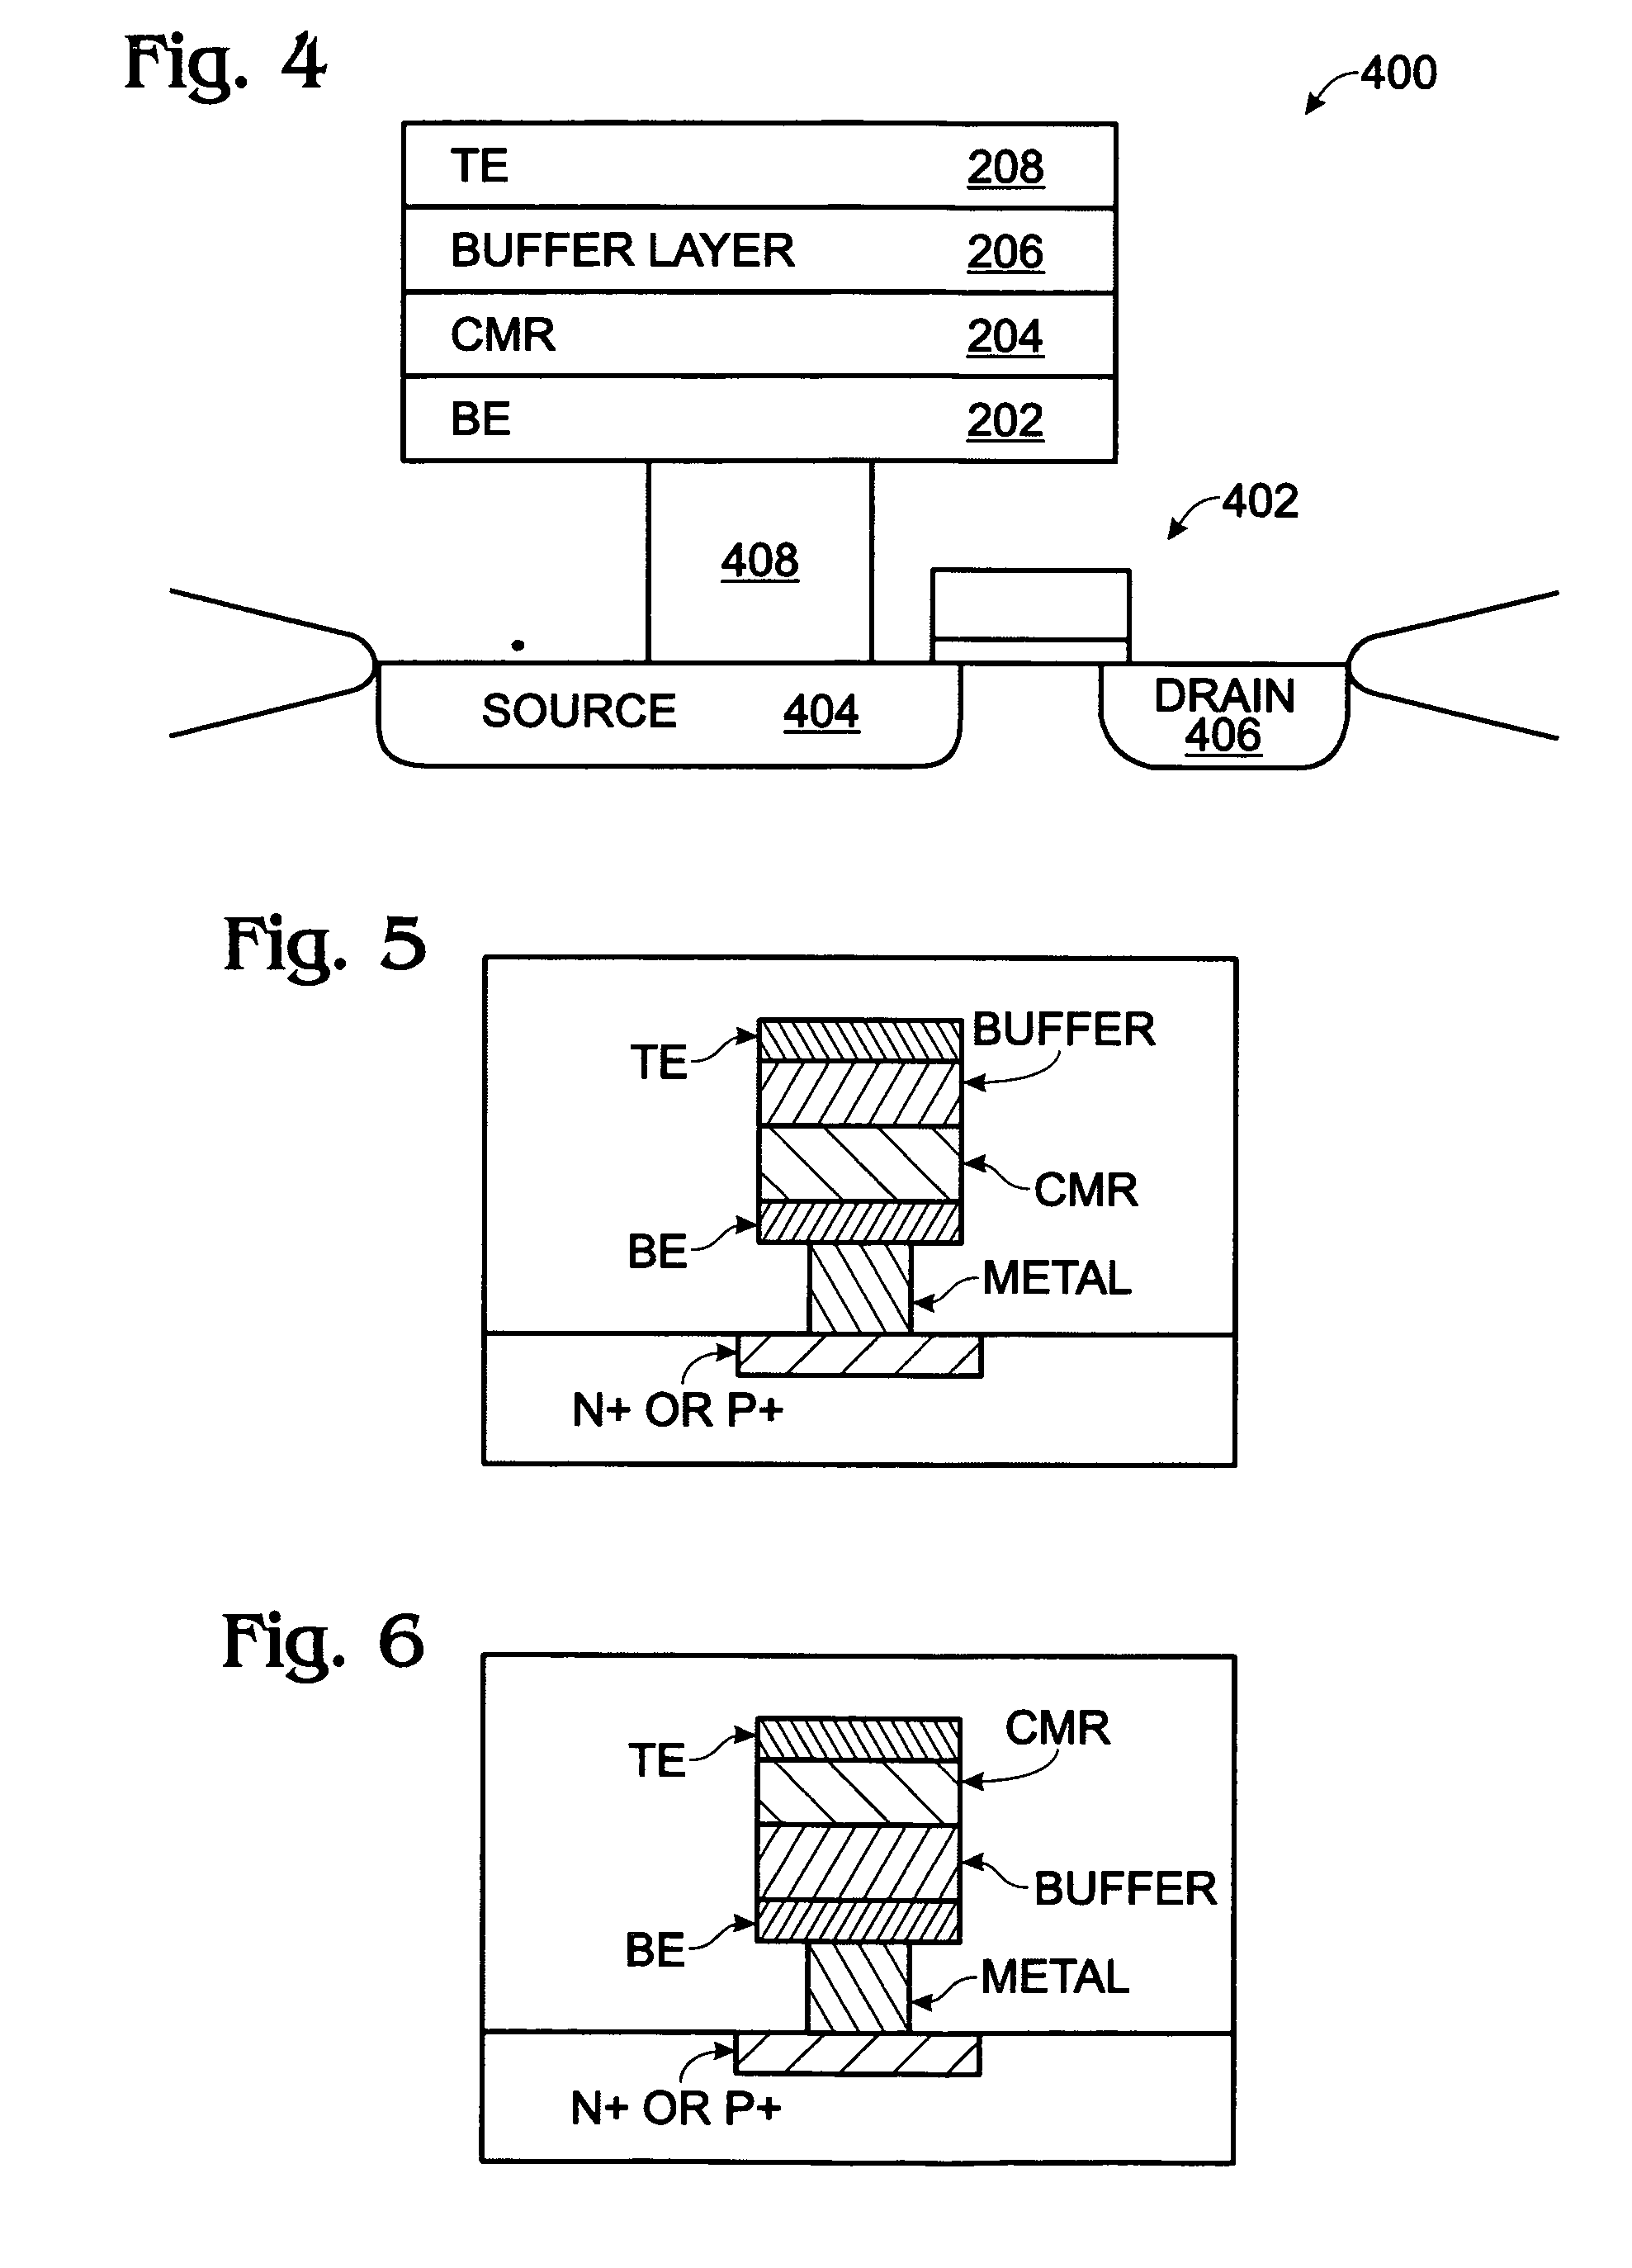 Memory cell with buffered layer